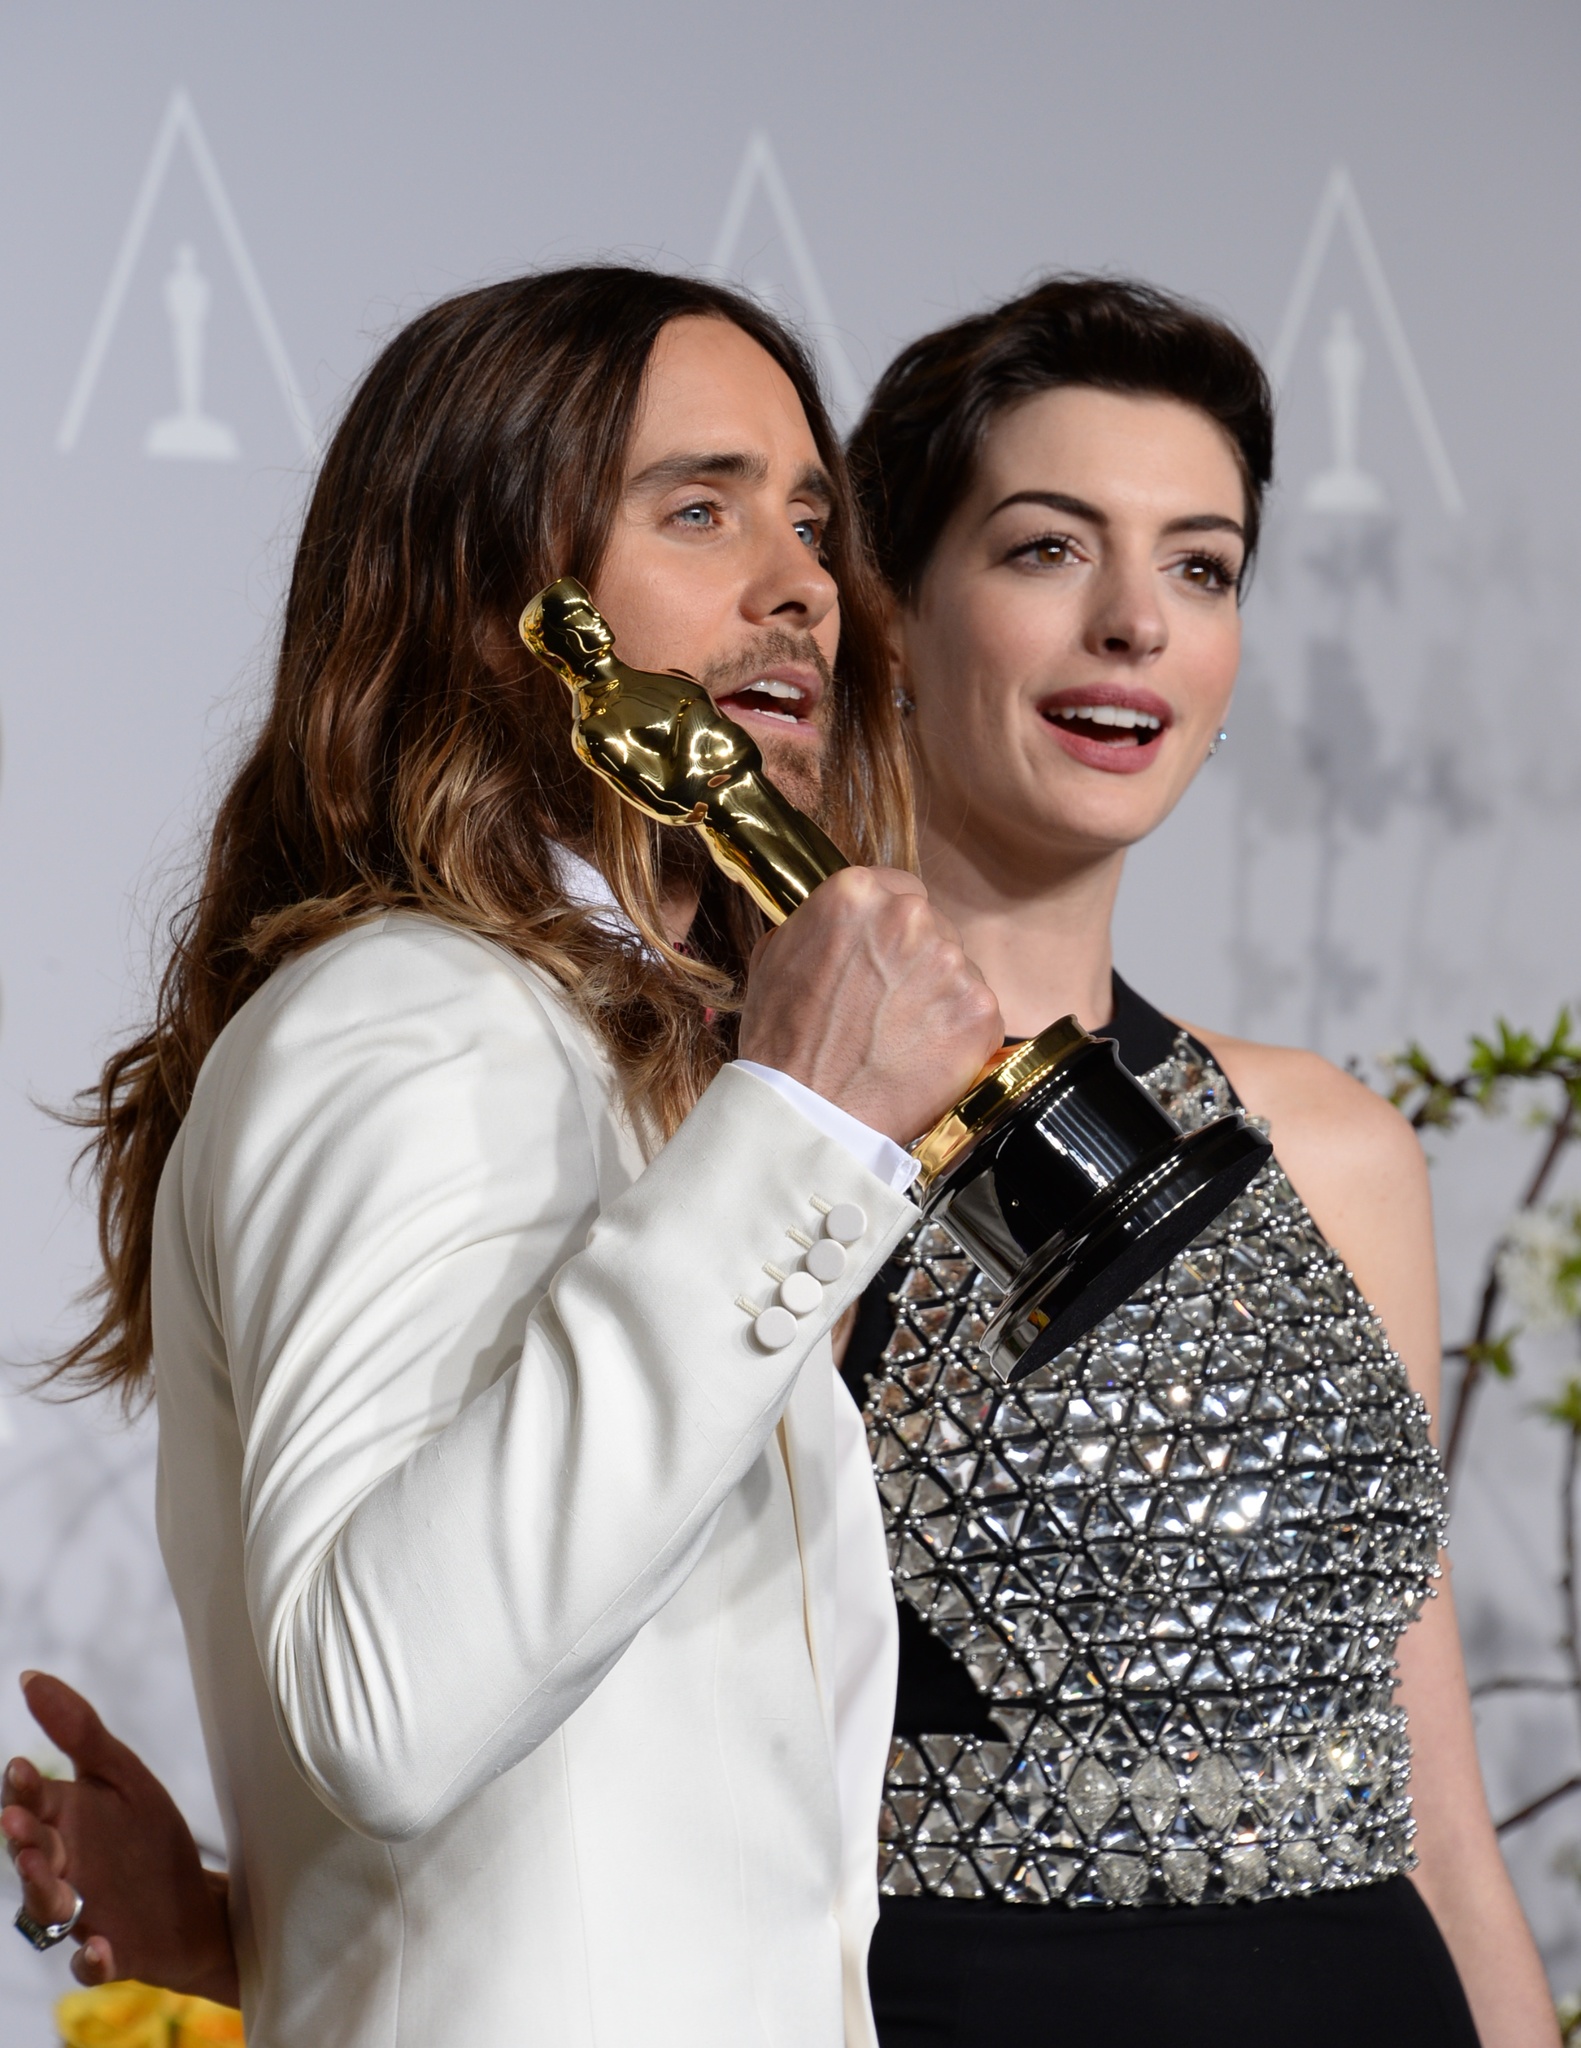 Jared Leto and Anne Hathaway